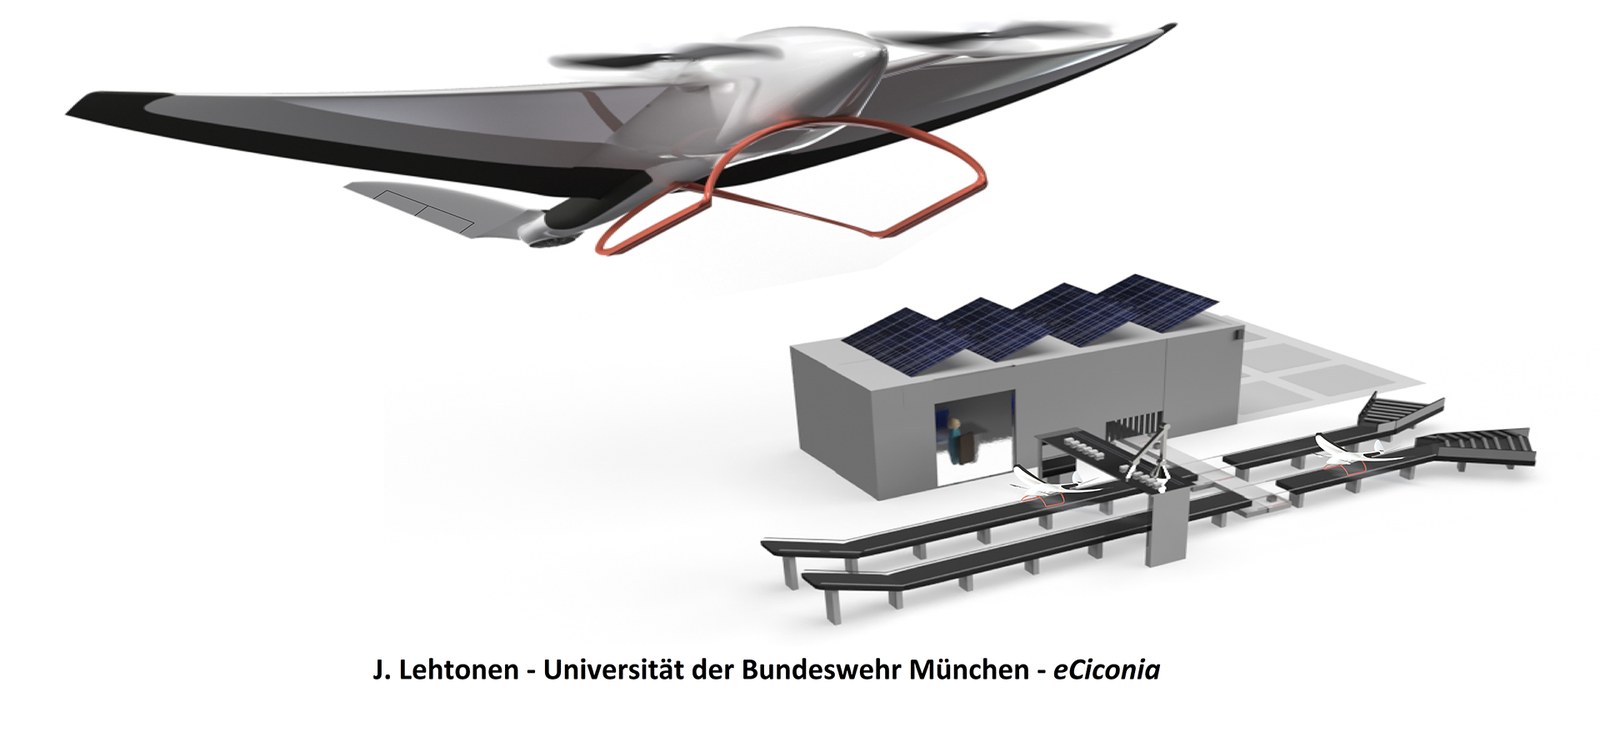 eCiconia -The concept of the Bundeswehr University Munich team